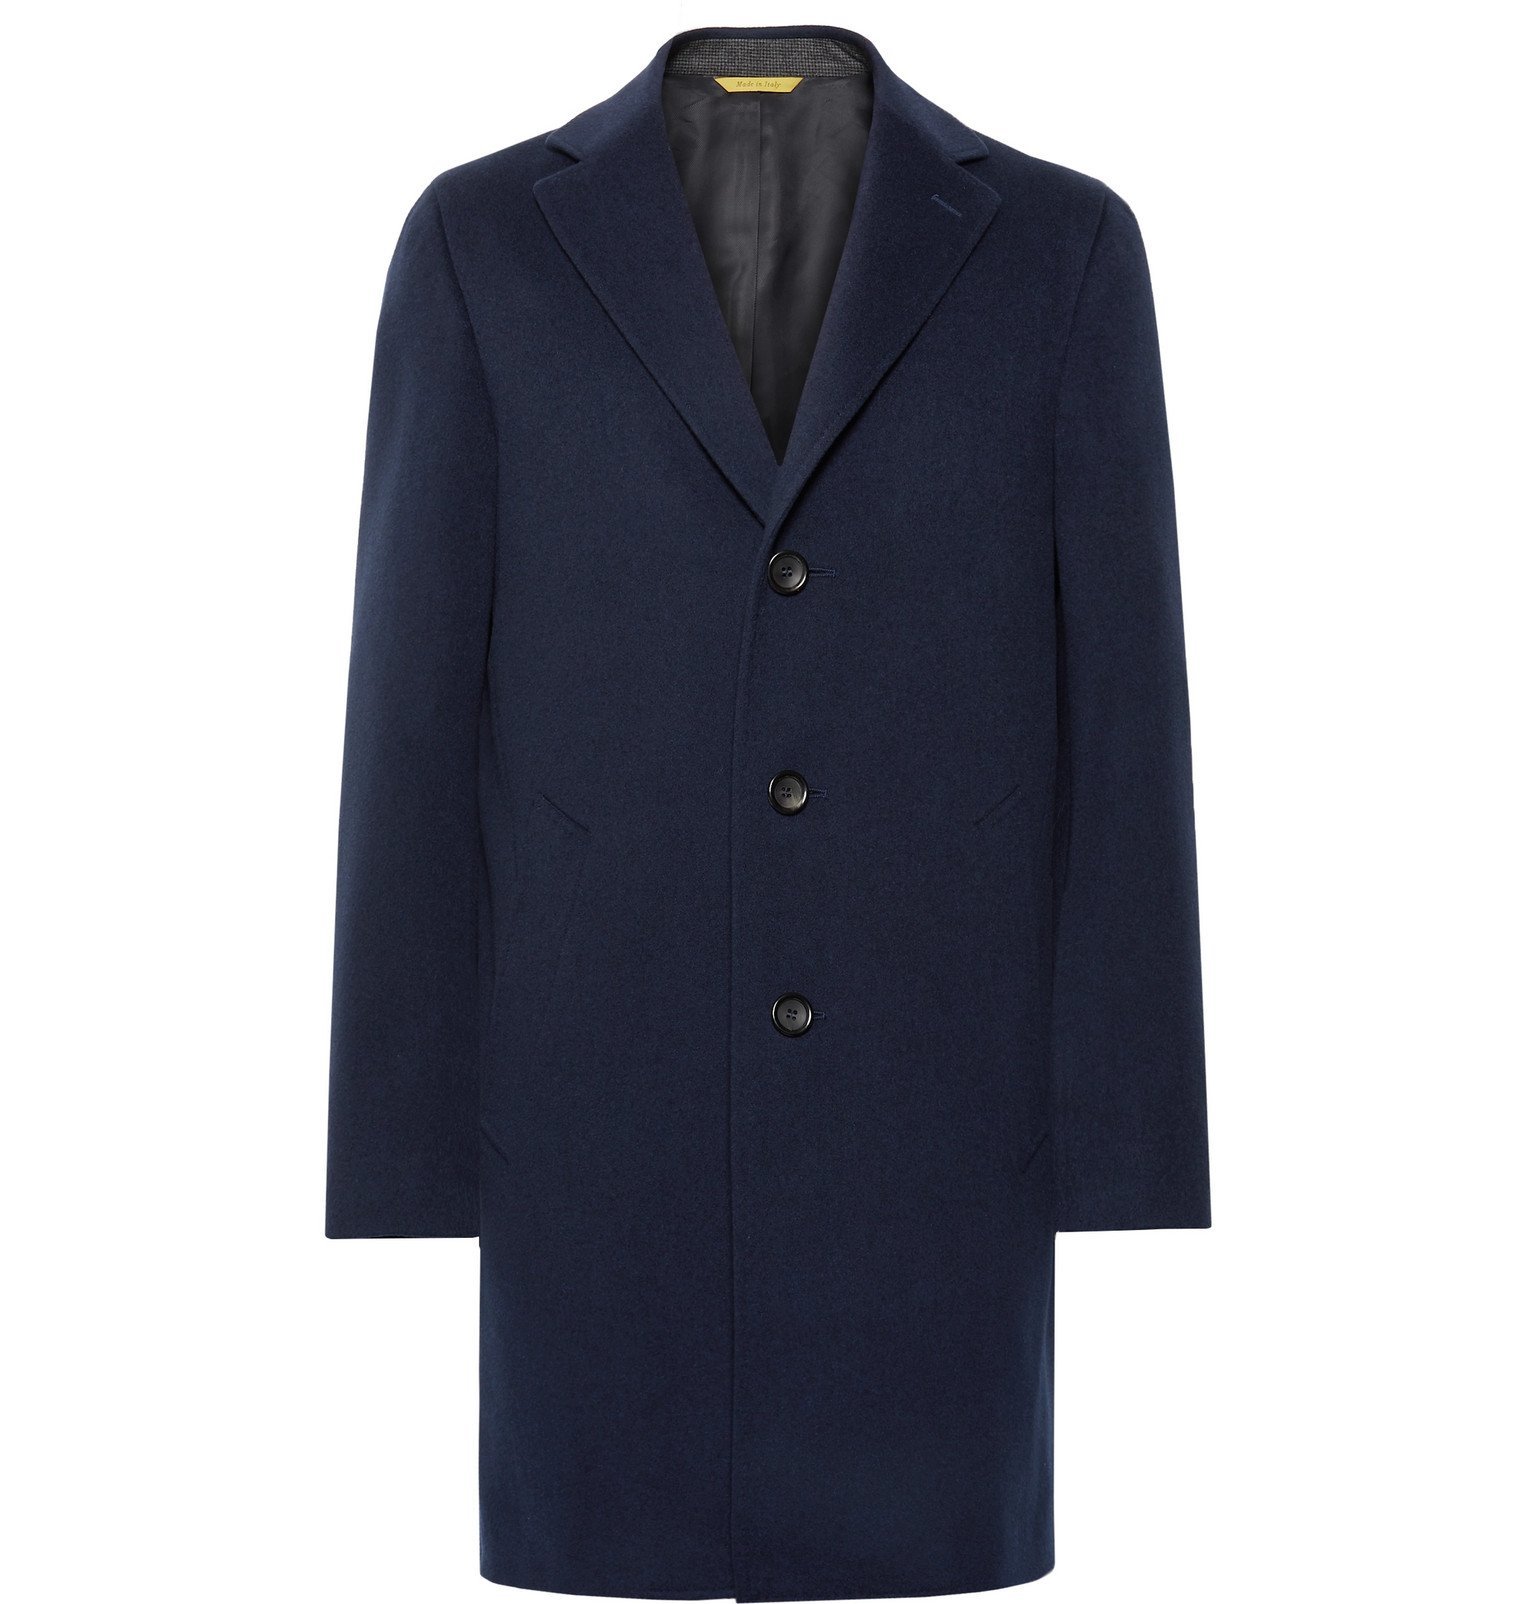 Canali - Wool and Cashmere-Blend Overcoat - Blue Canali